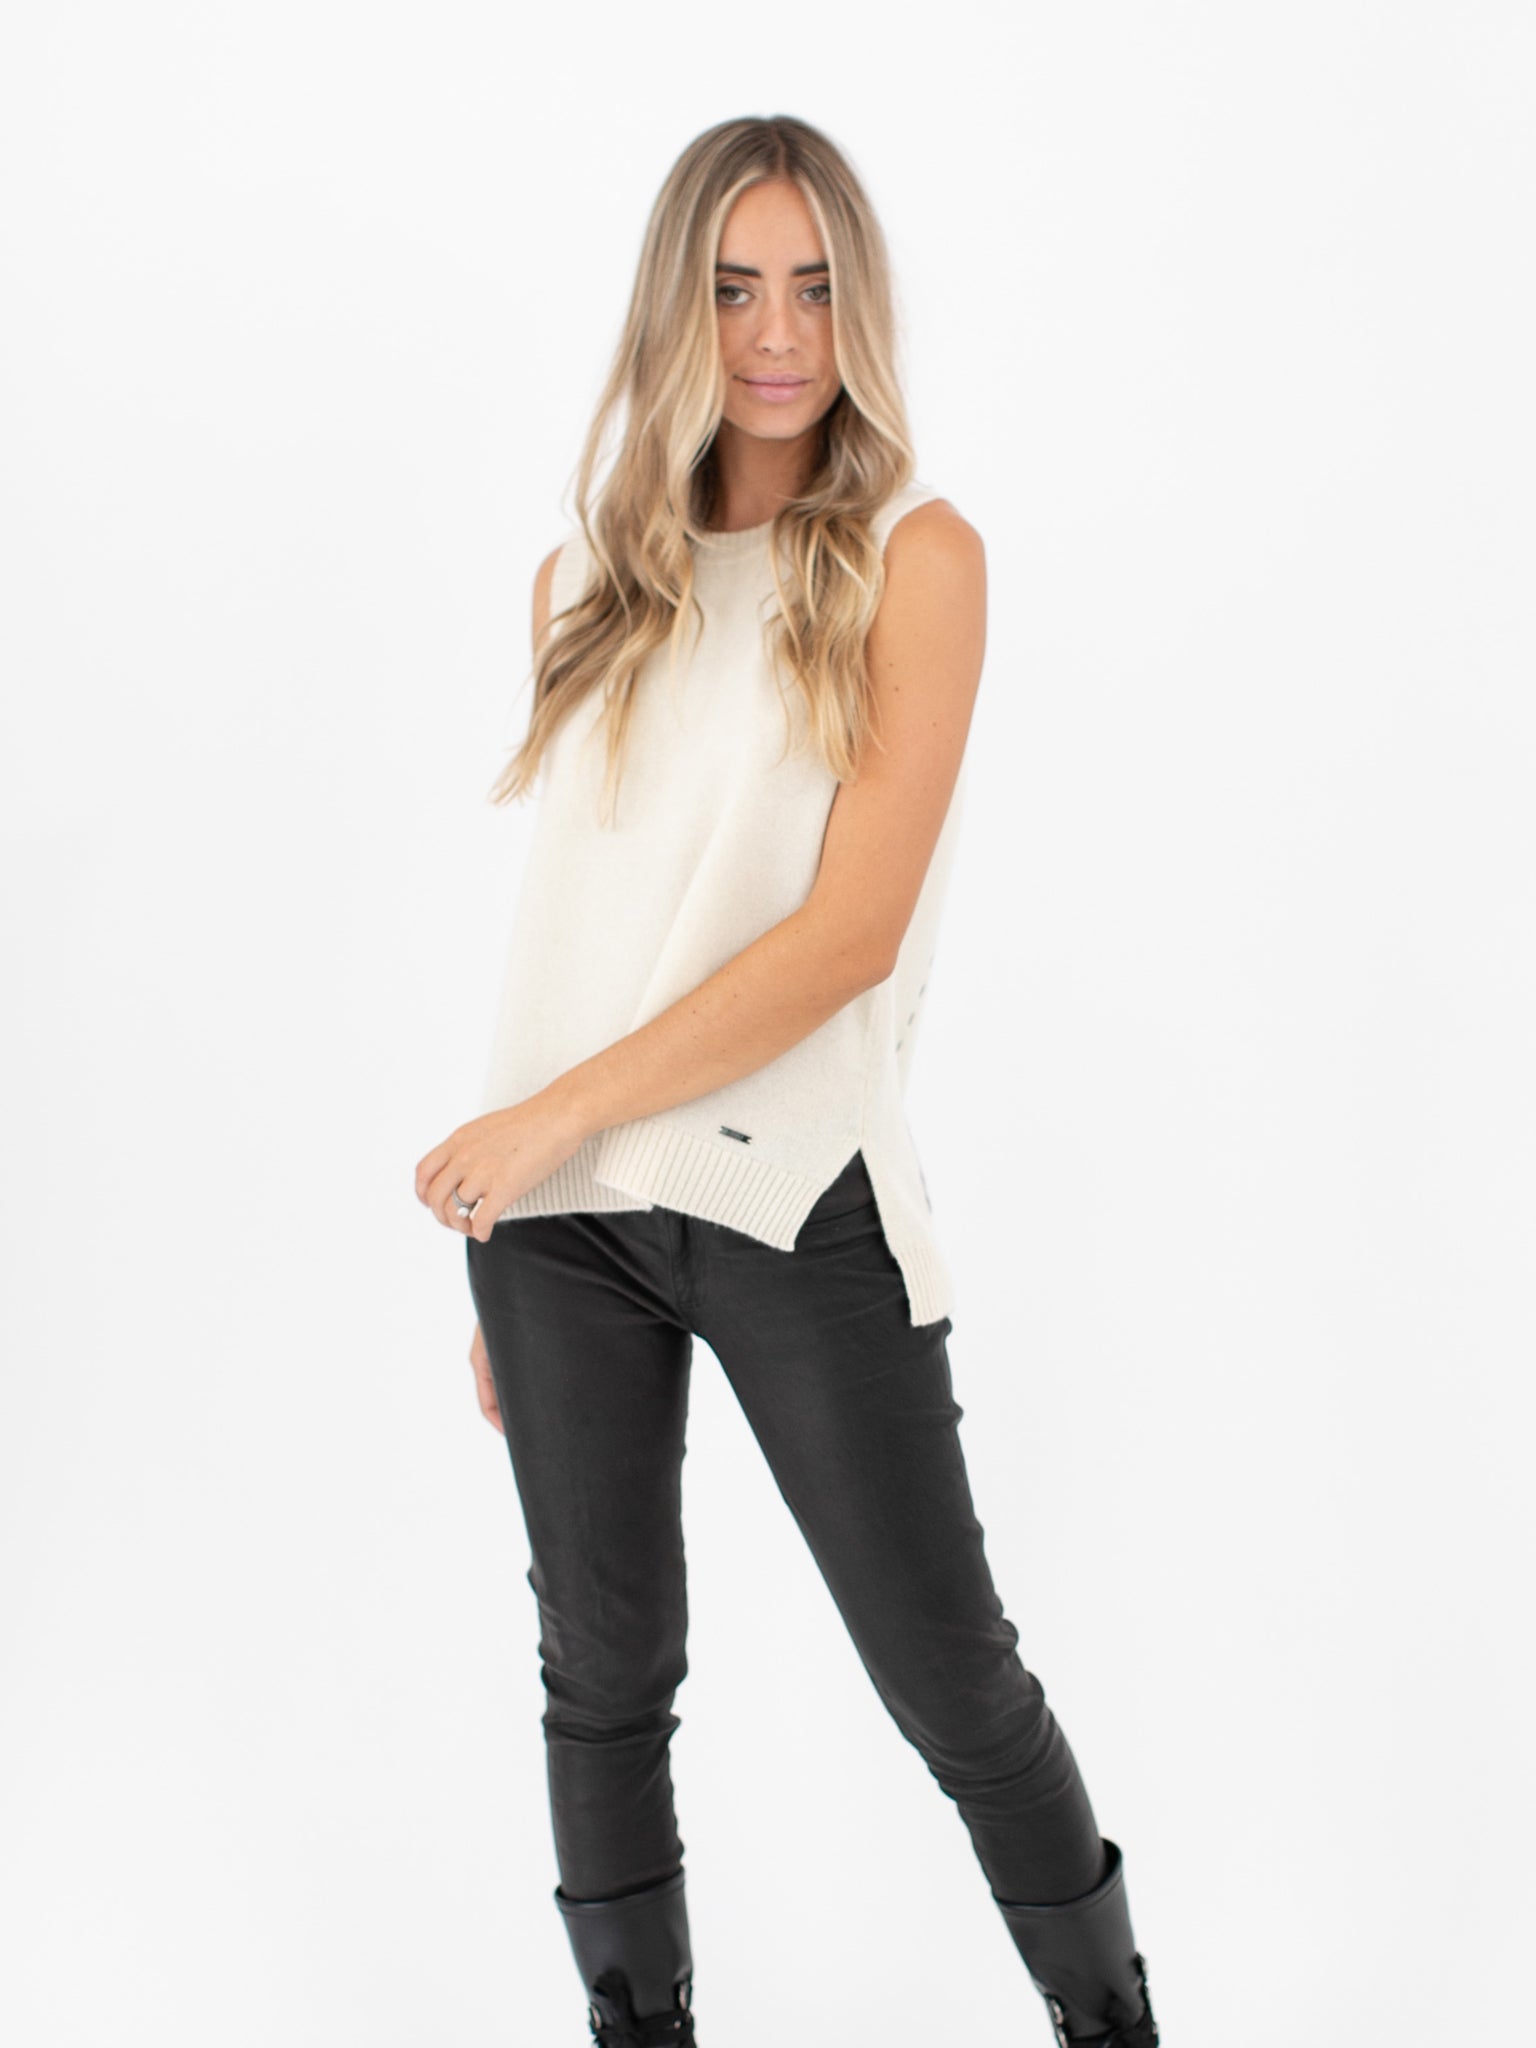 Sleeveless Cashmere Sweater Top with High-Low Hem